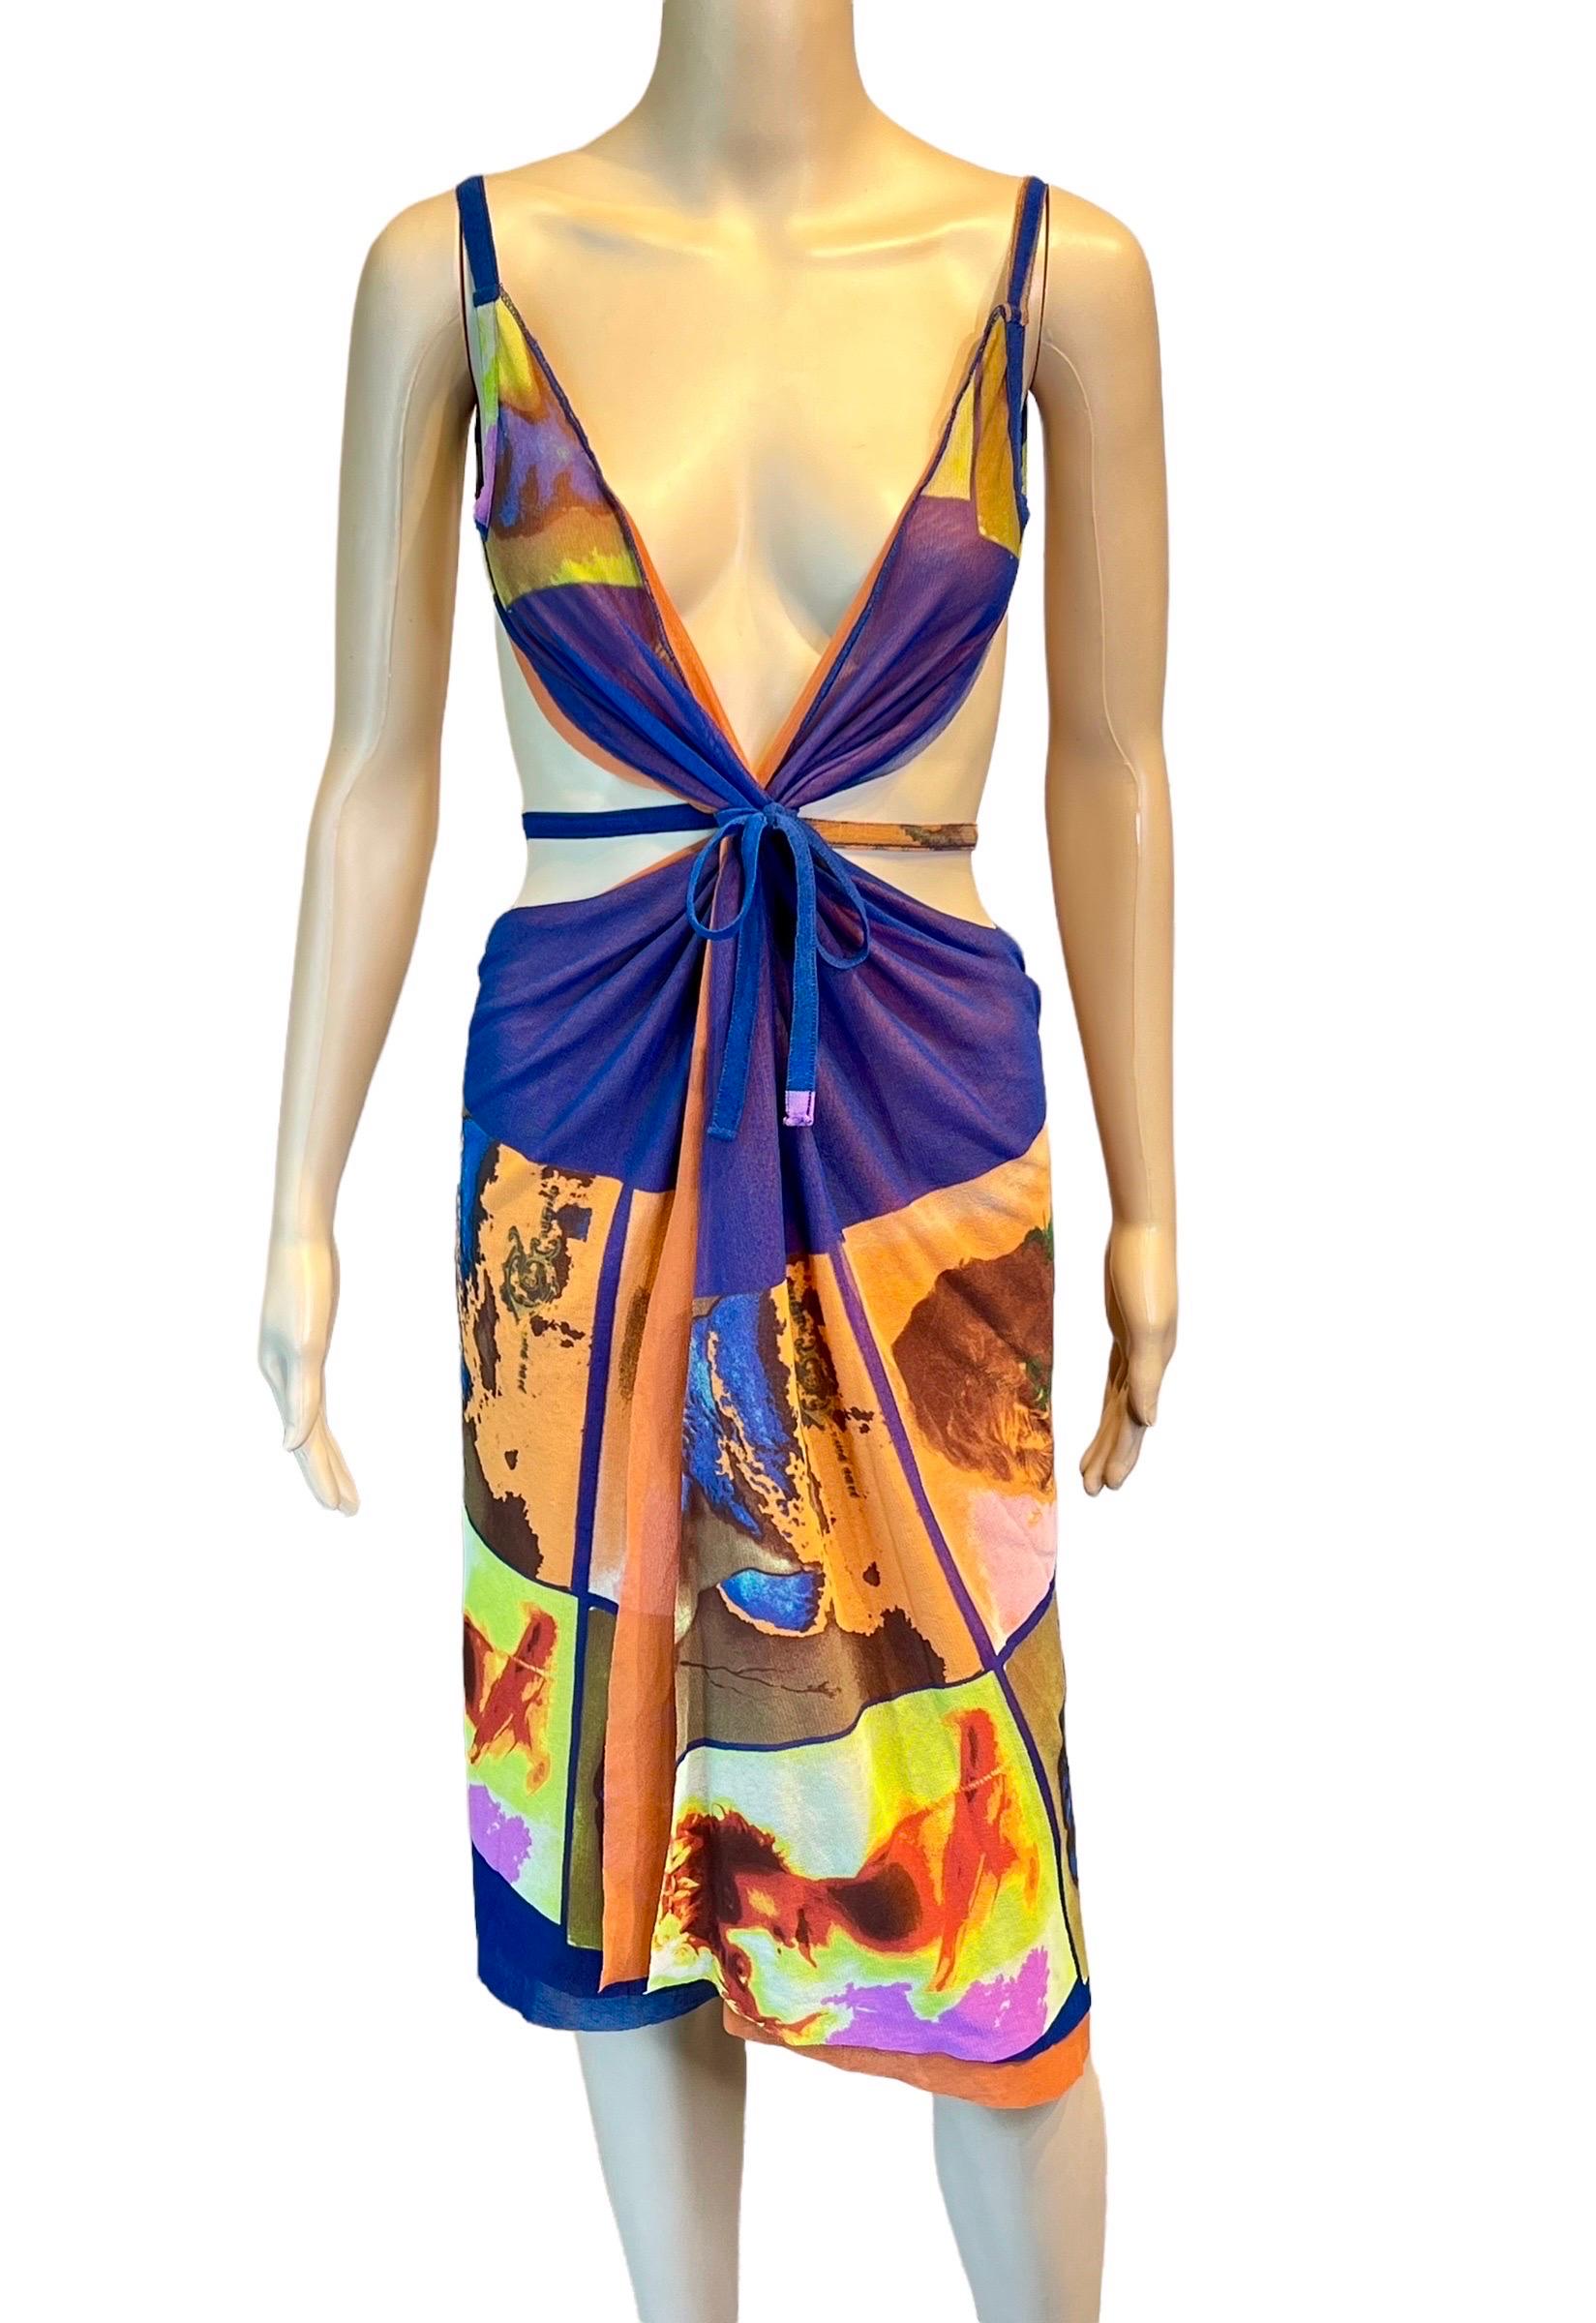 Jean Paul Gaultier Soleil S/S 2002 Vintage “Portraits” Mesh Wrap Dress Size M

Please note this wrap dress is very versatile and can be styled multiple ways based on preference as seen in photos.


